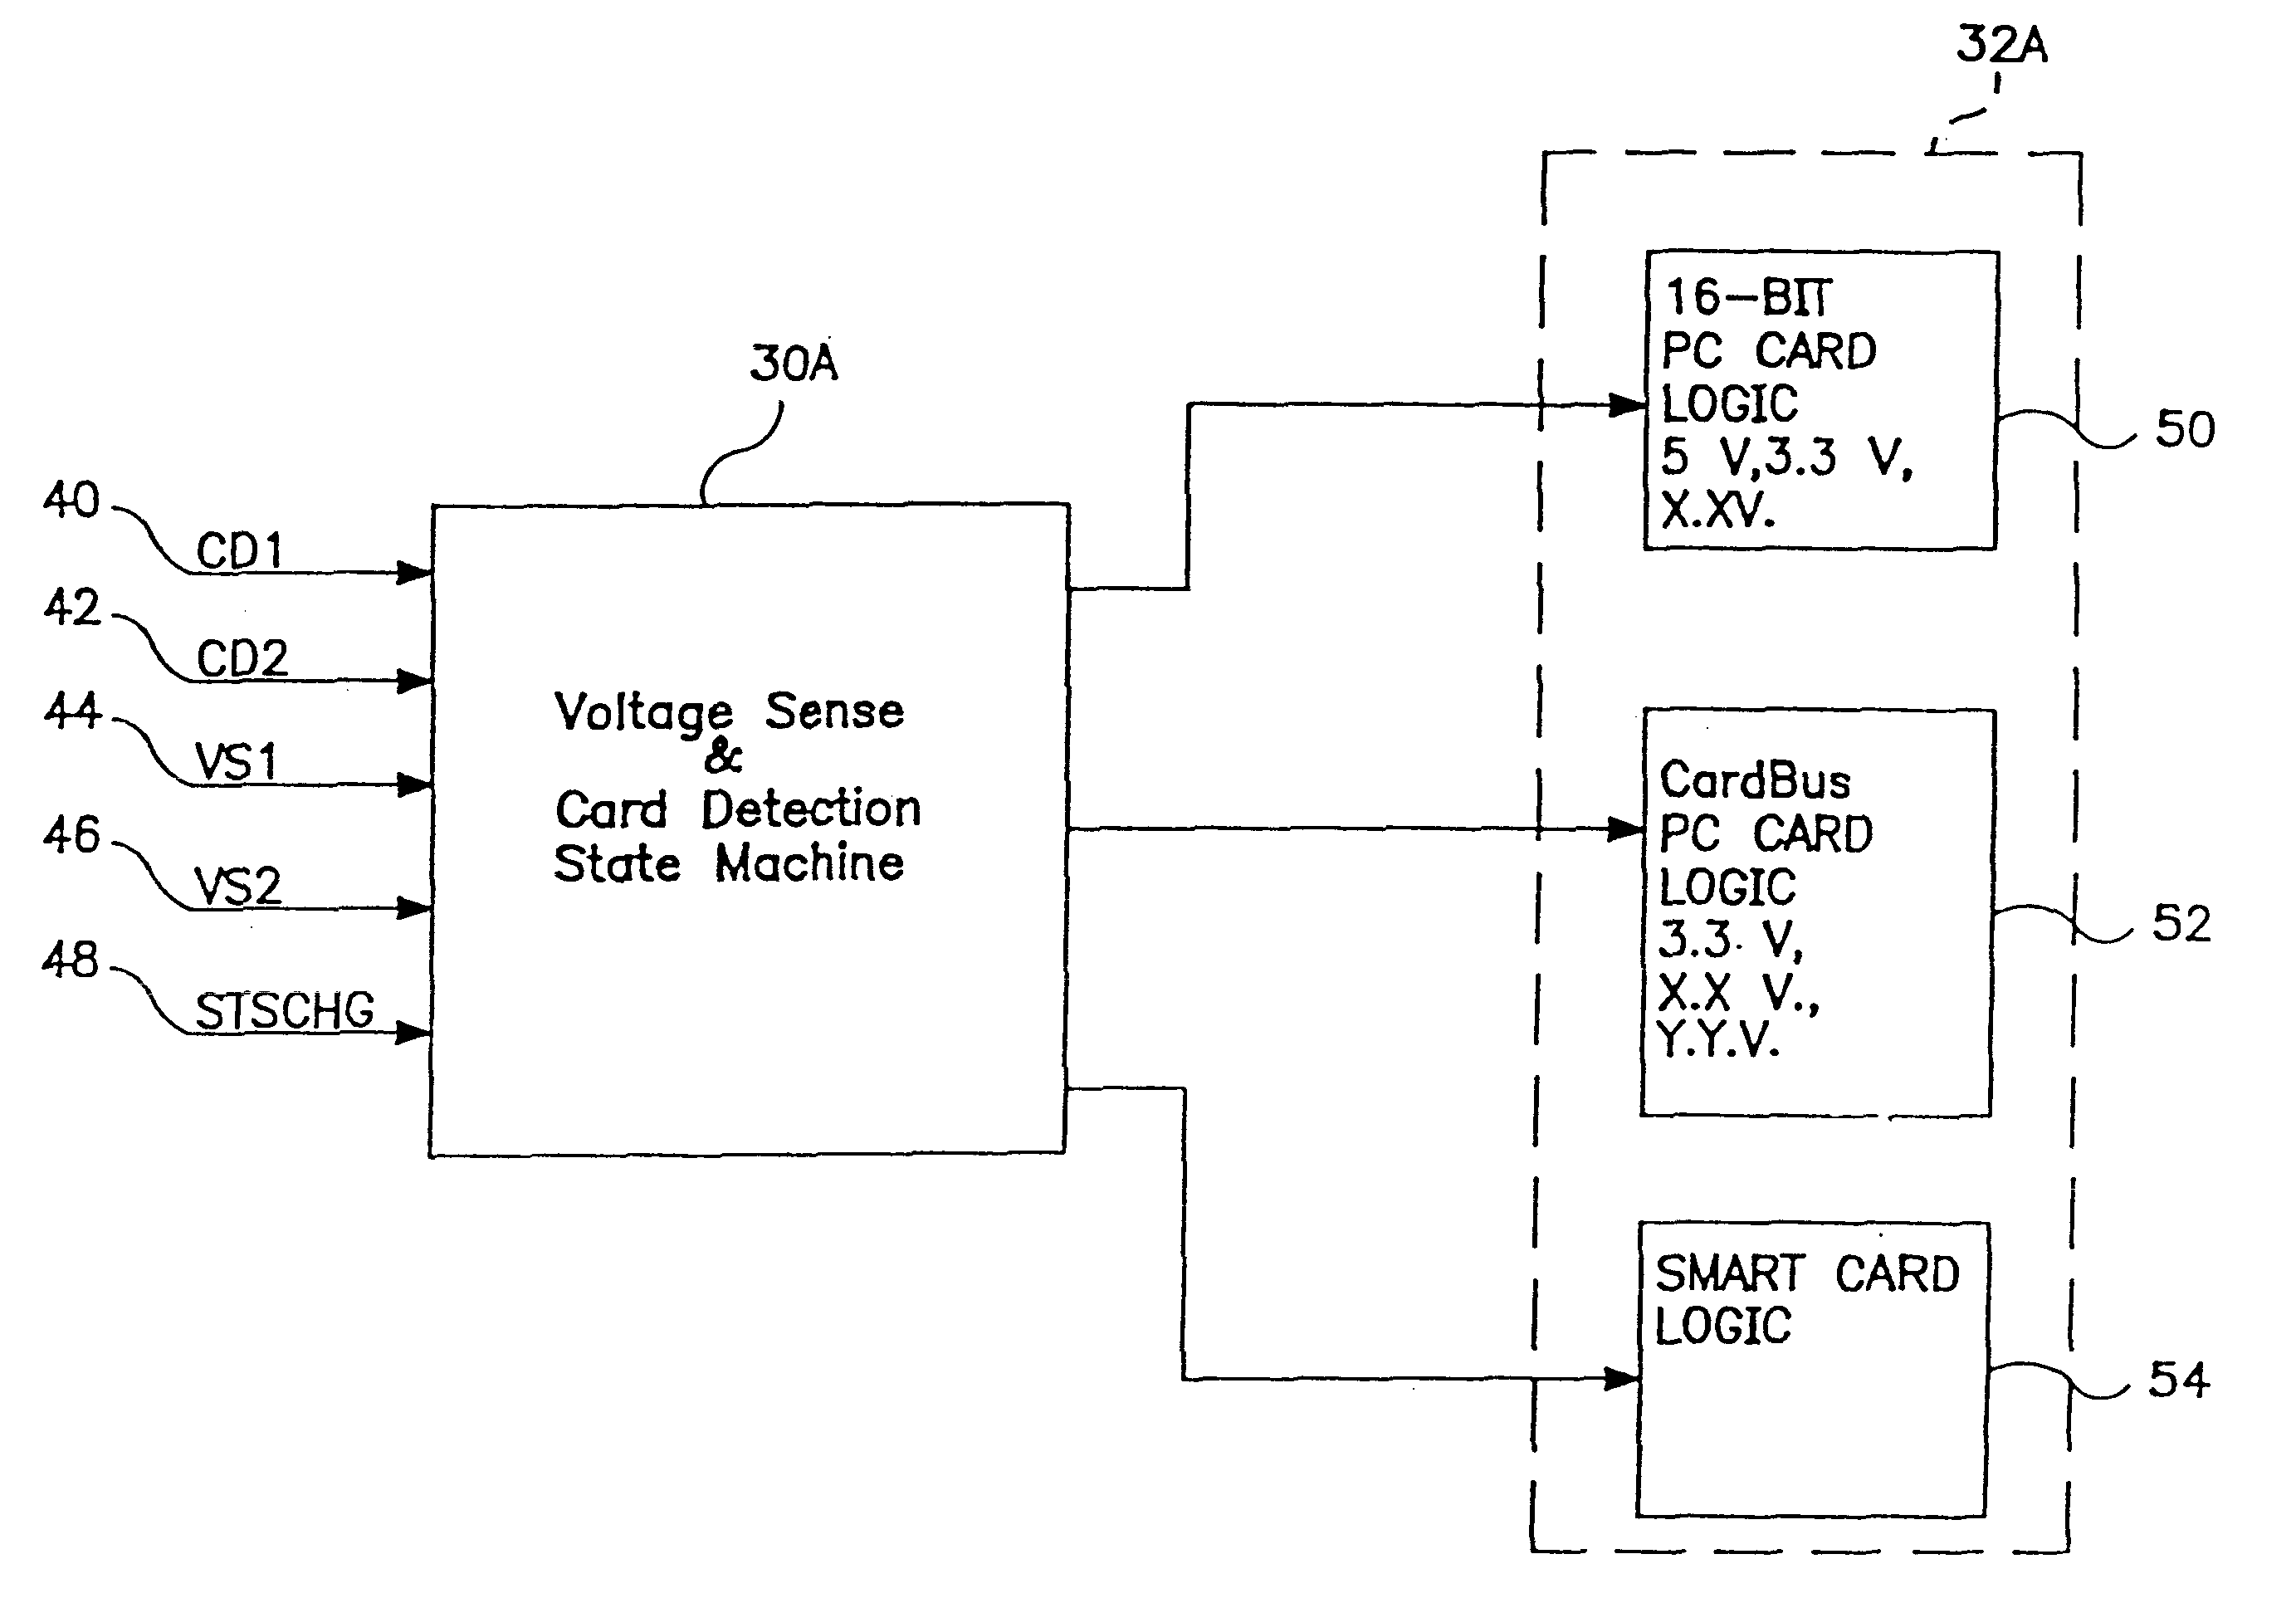 Integrated PC card host controller for the detection and operation of a plurality of expansion cards